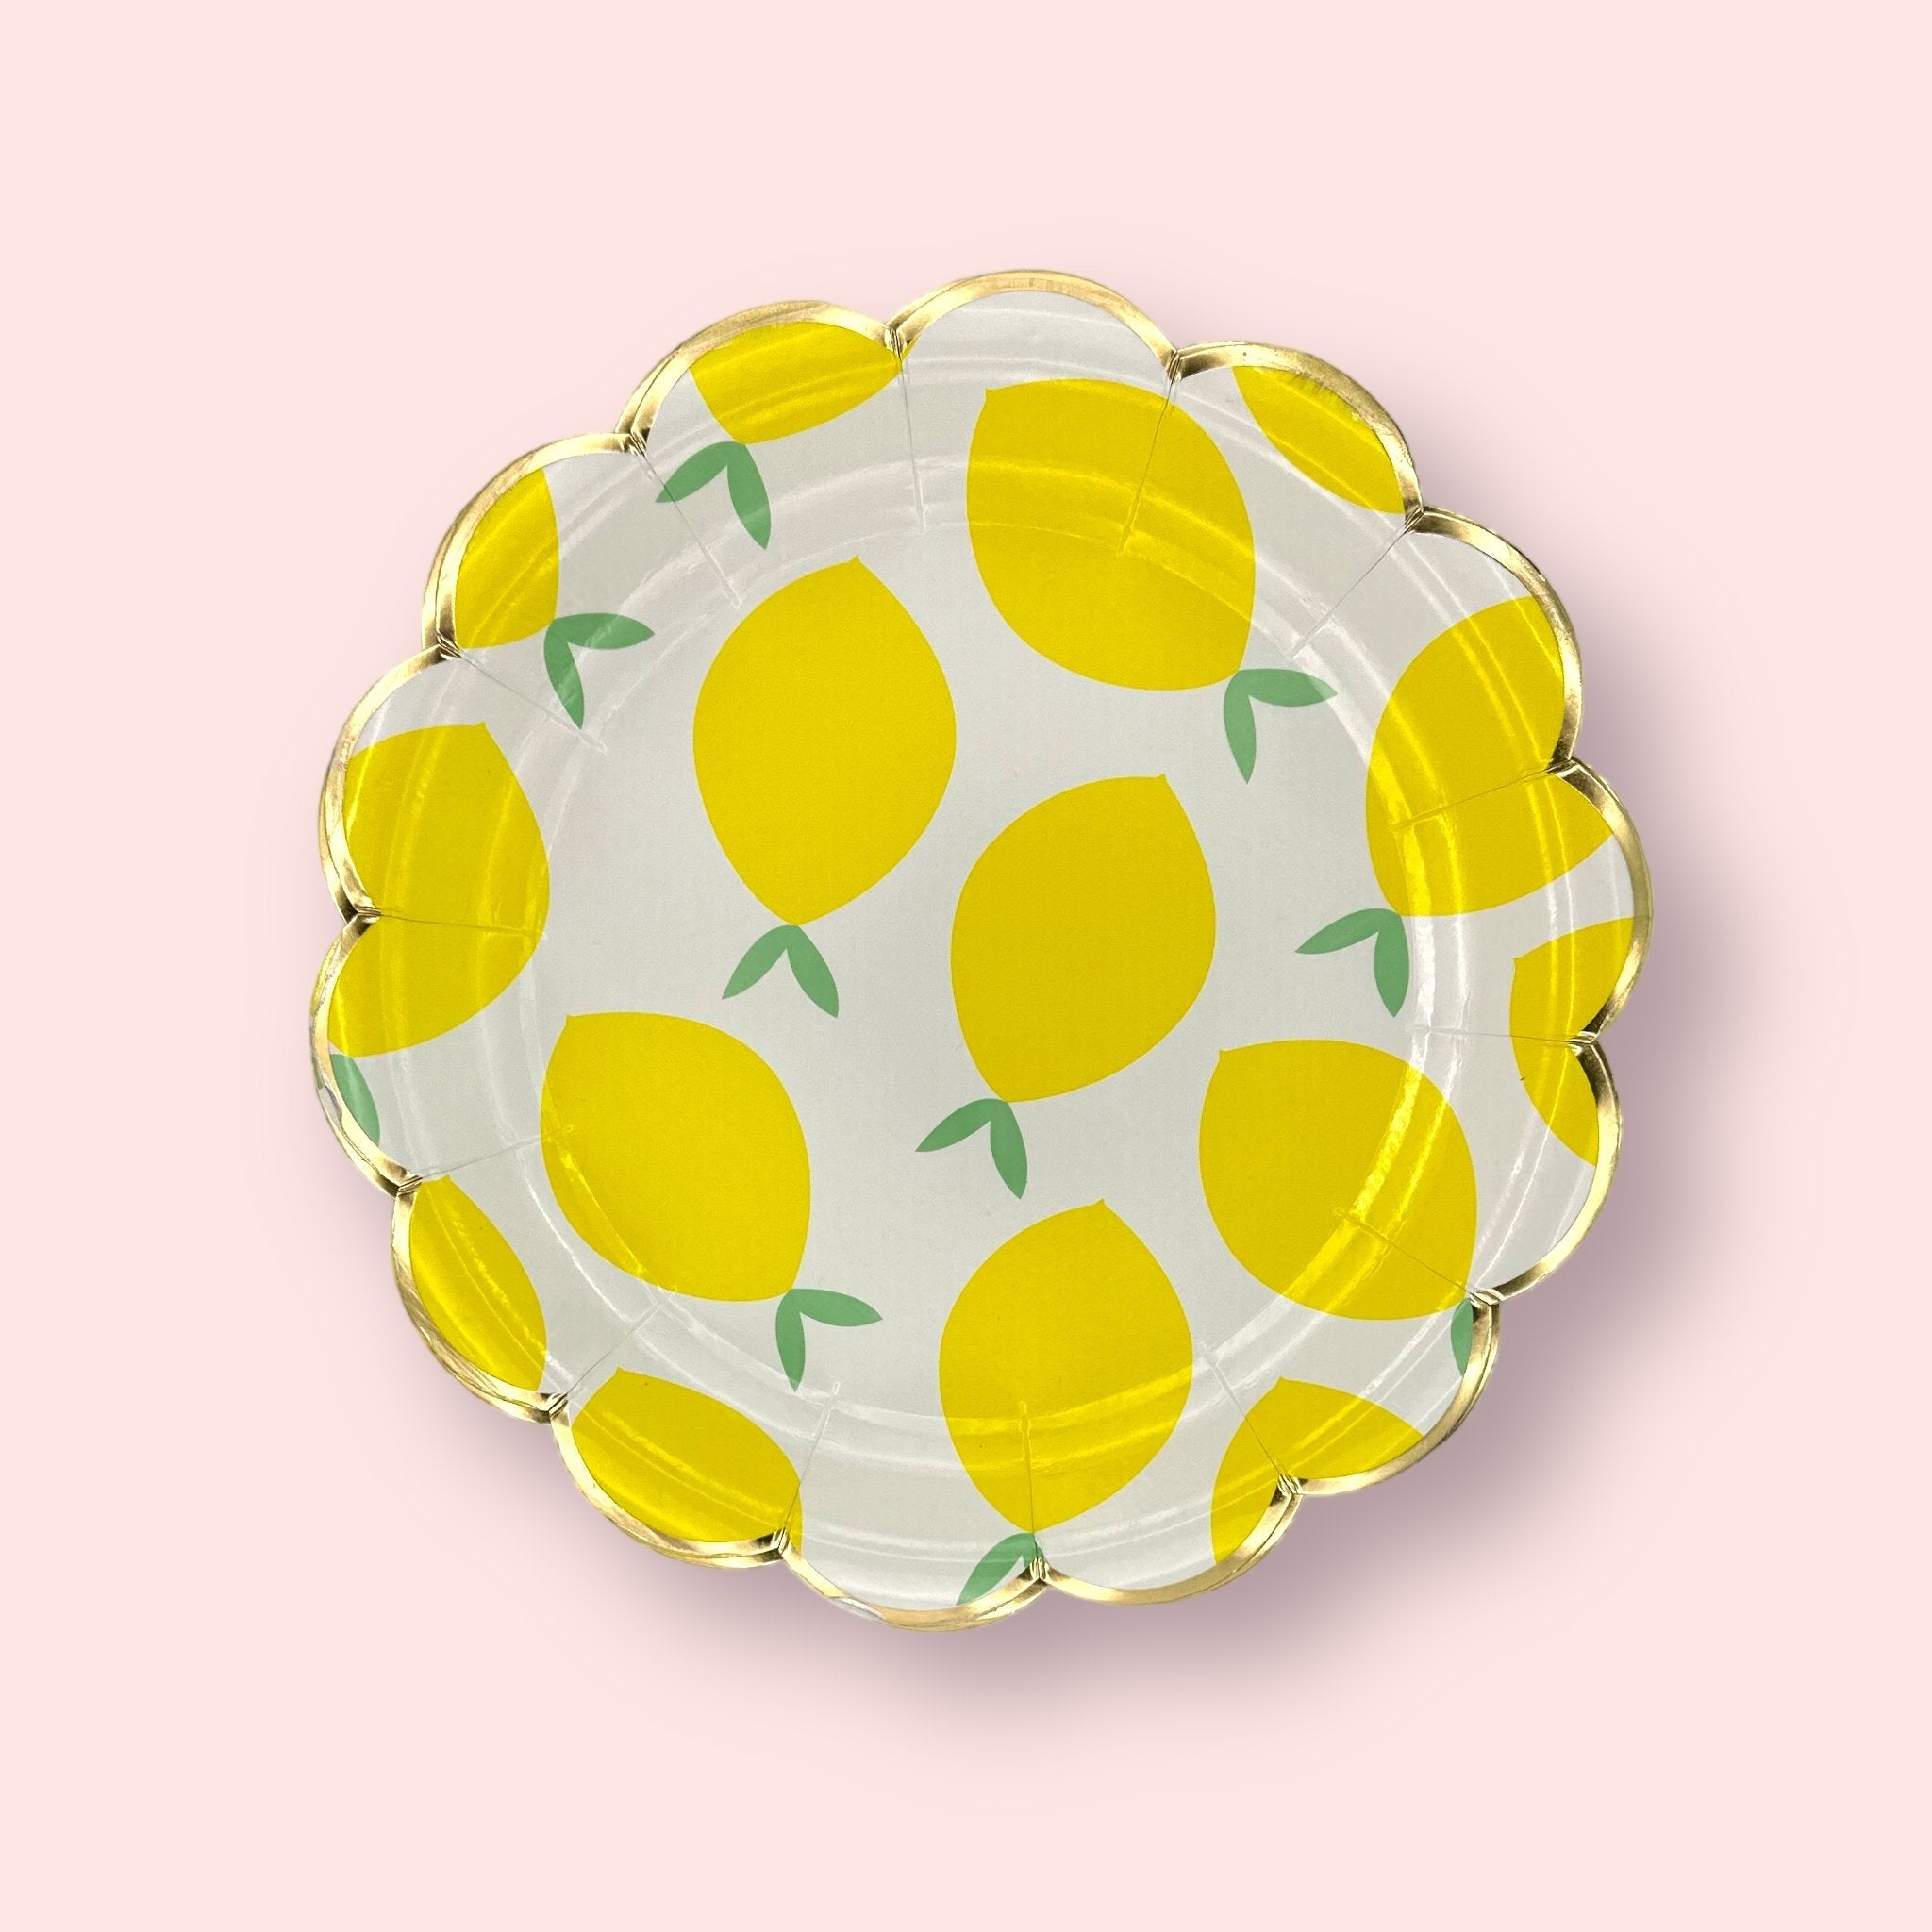 8 Positano Lemon Paper Party Cake Plates (9 inch) - Cook and Party